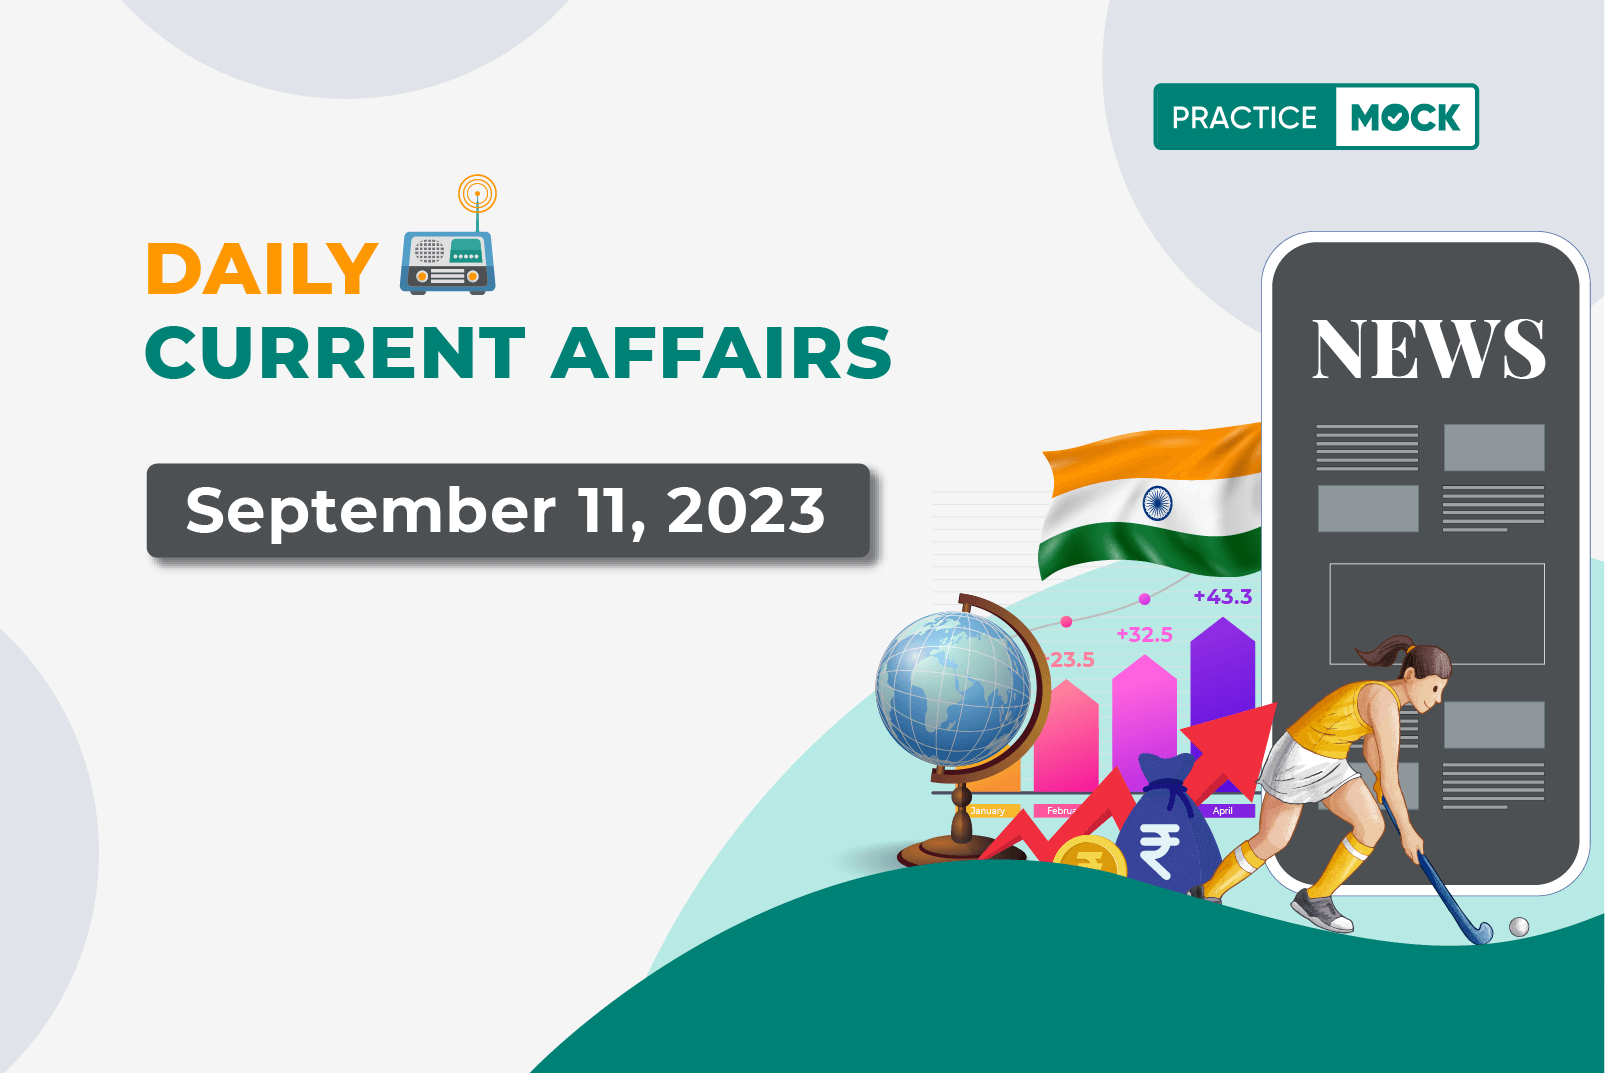 Daily Current Affairs- September 11, 2023